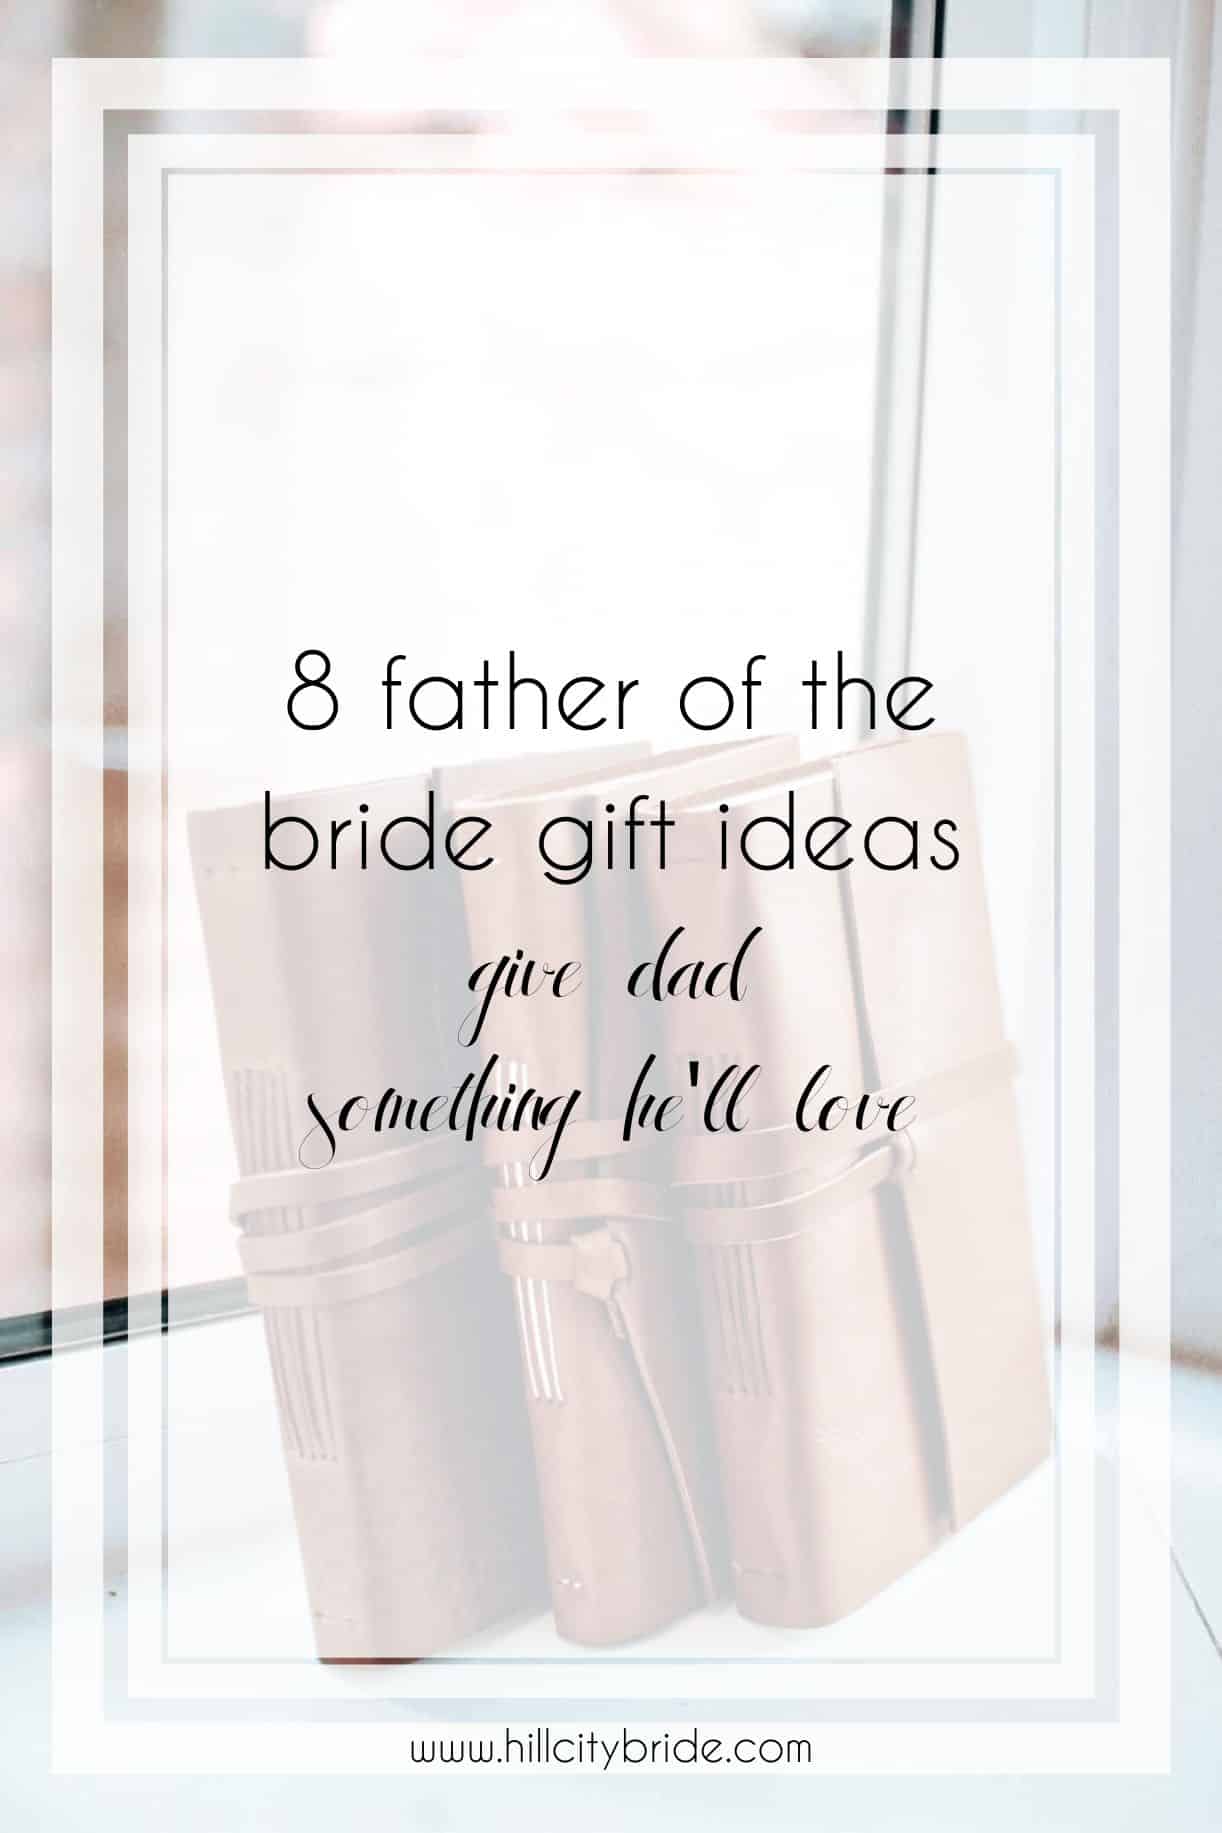 Wedding Gifts Father of the Bride, Personalized father of the bride gifts